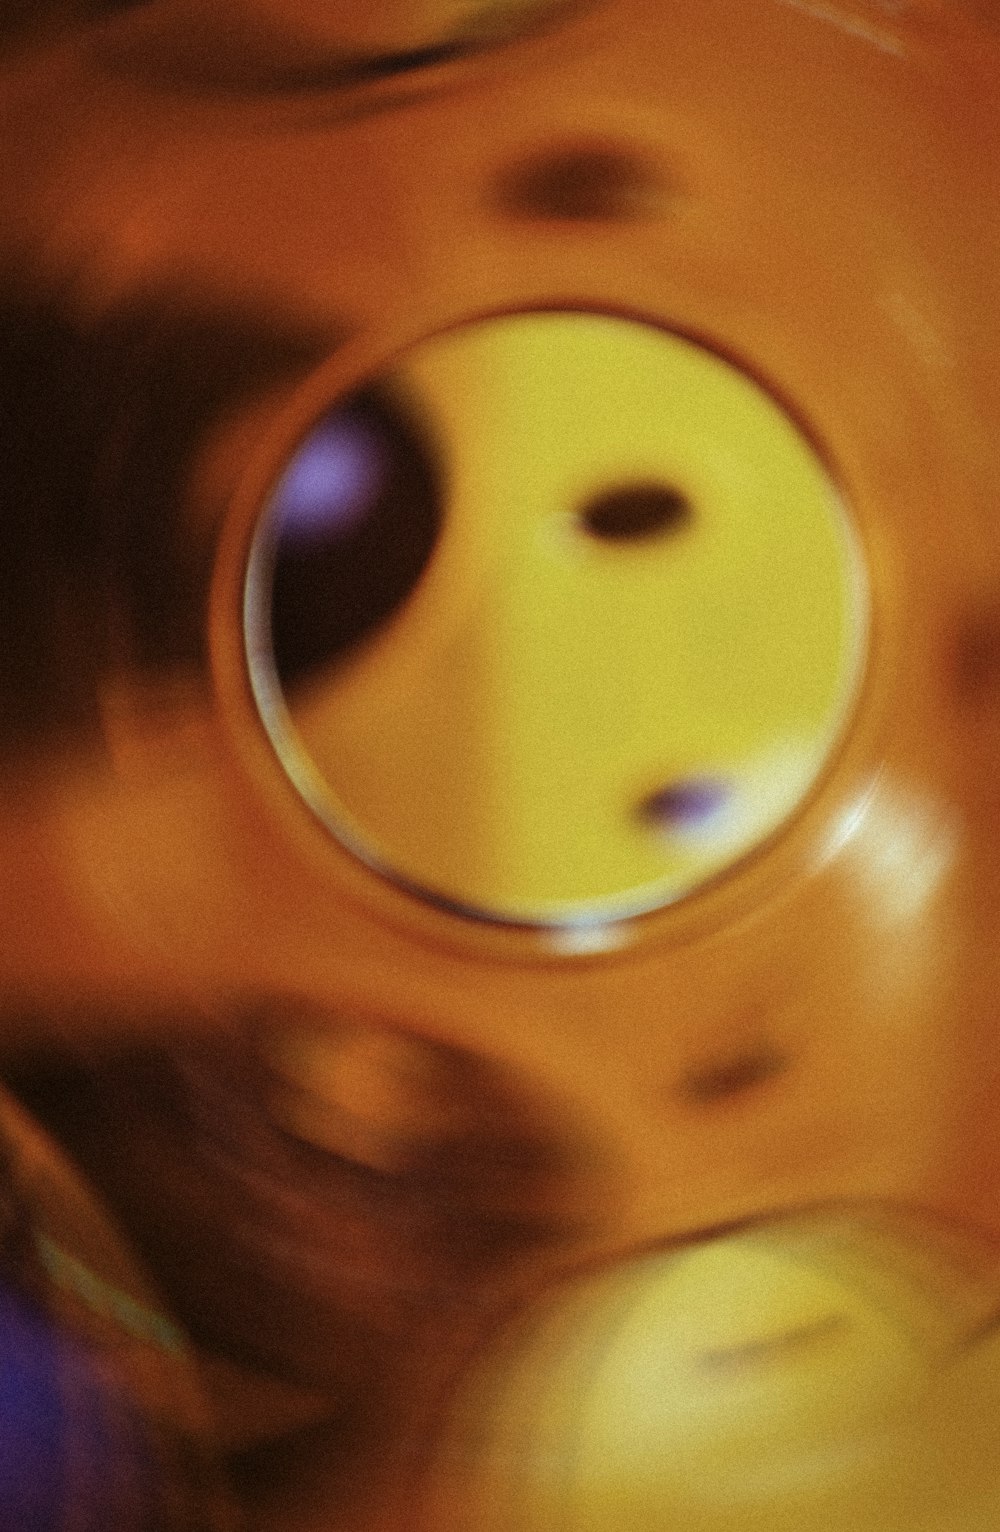 a blurry picture of a yellow and blue object